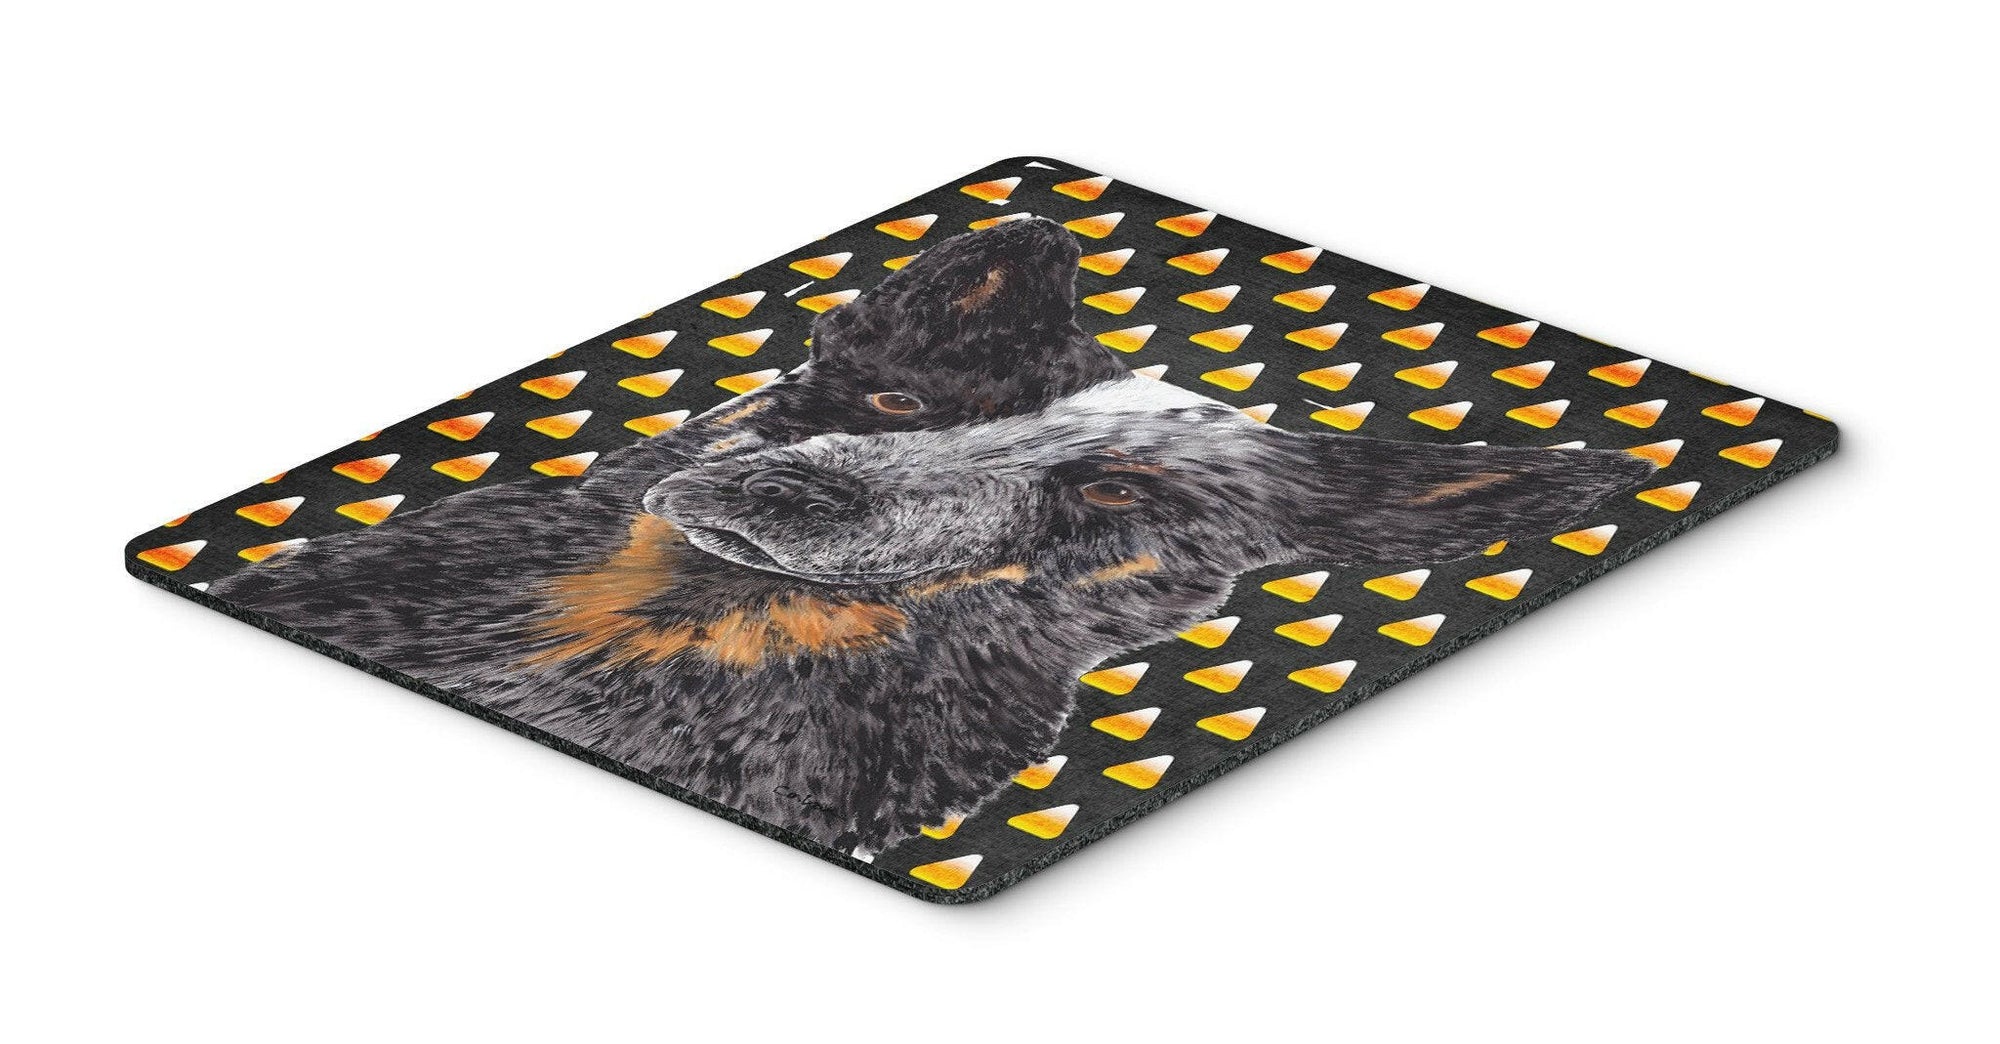 Australian Cattle Dog Candy Corn Halloween Mouse Pad, Hot Pad or Trivet by Caroline's Treasures